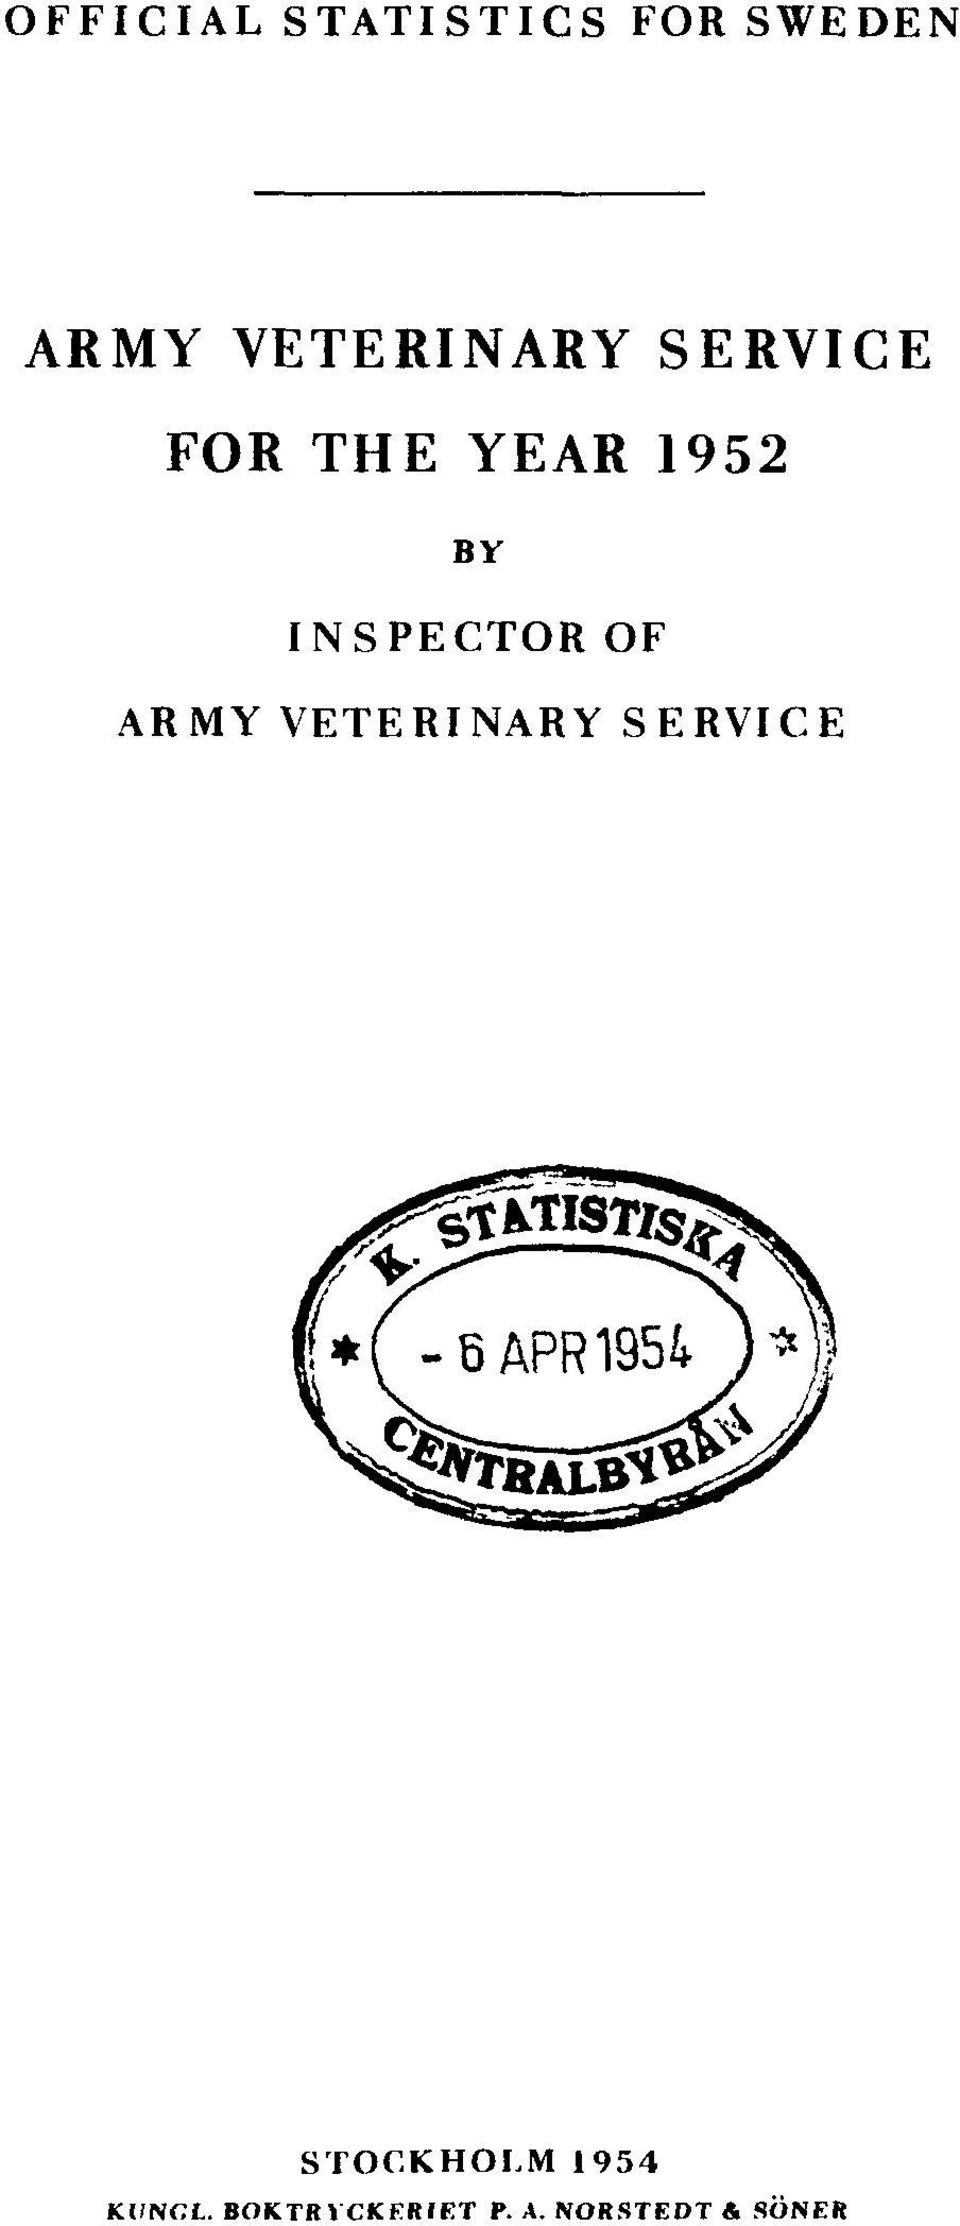 INSPECTOR OF ARMY VETERINARY SERVICE